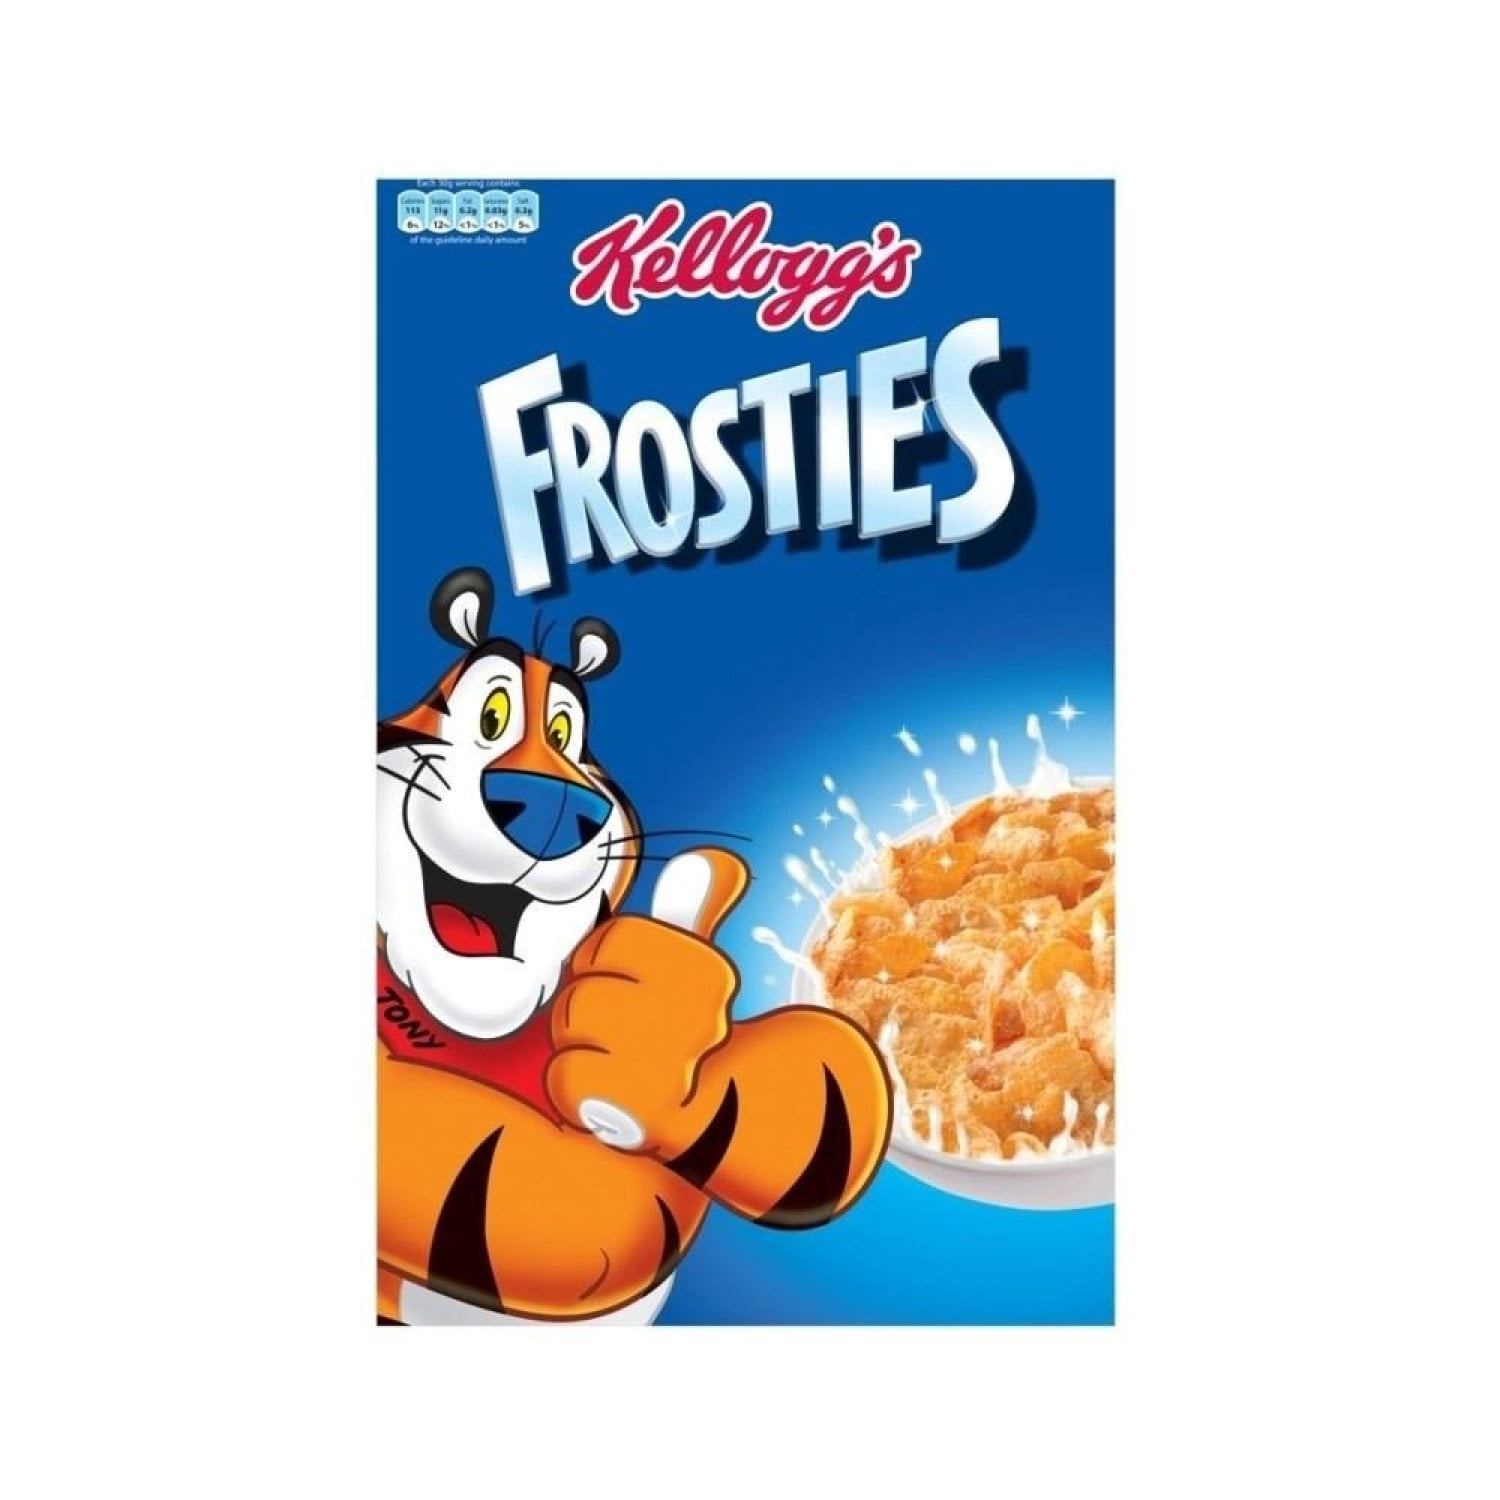 Kellogg's Frosties (500g) - Pack of 2, Sugar frosted flakes of corn 